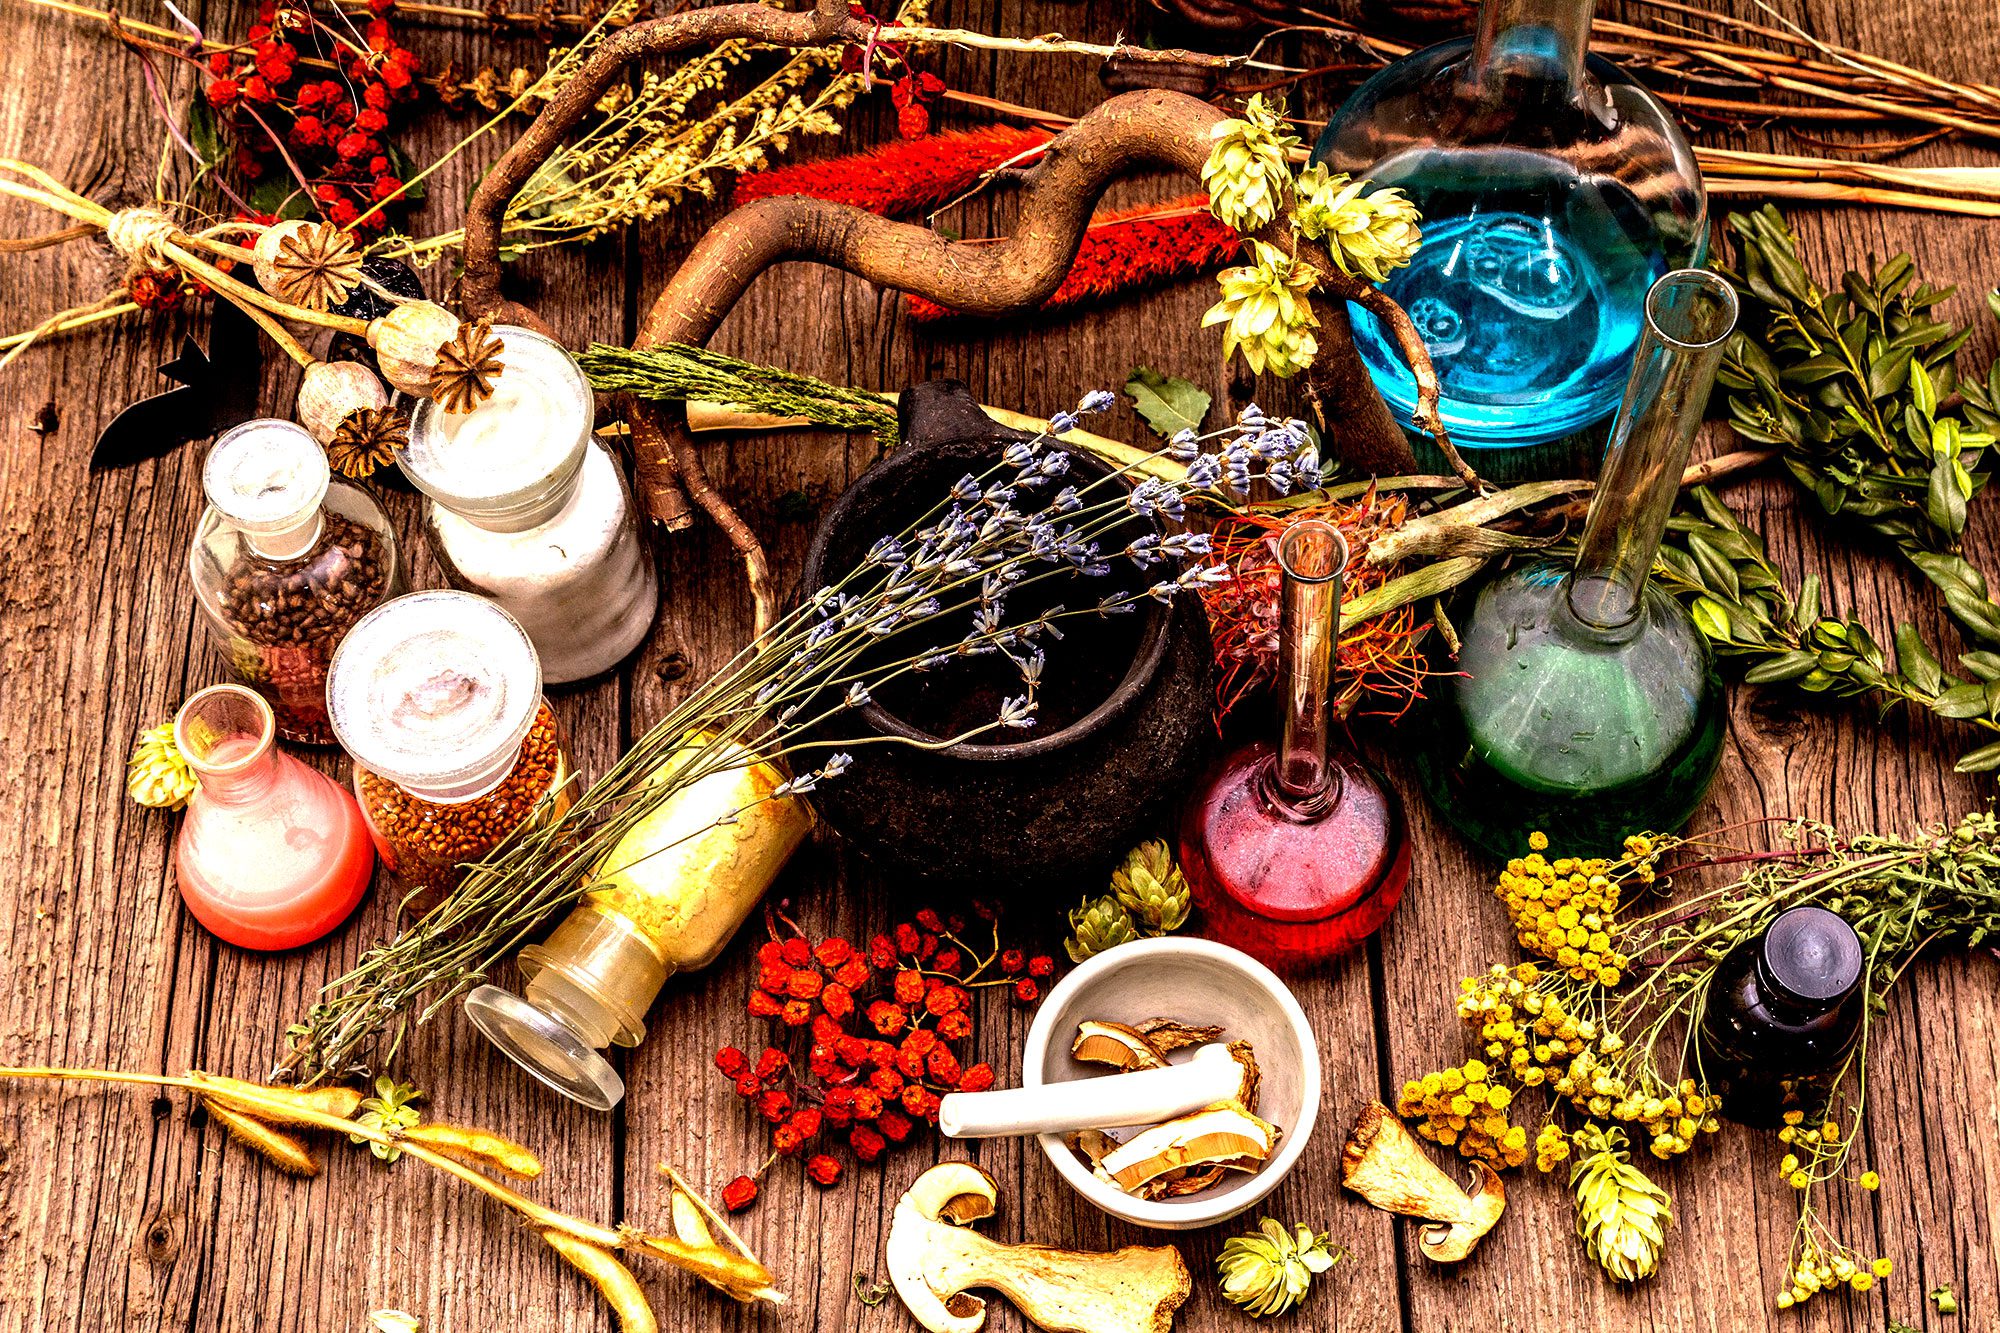 Elements, colors, herbs used in spells and how they correspond to our objectives